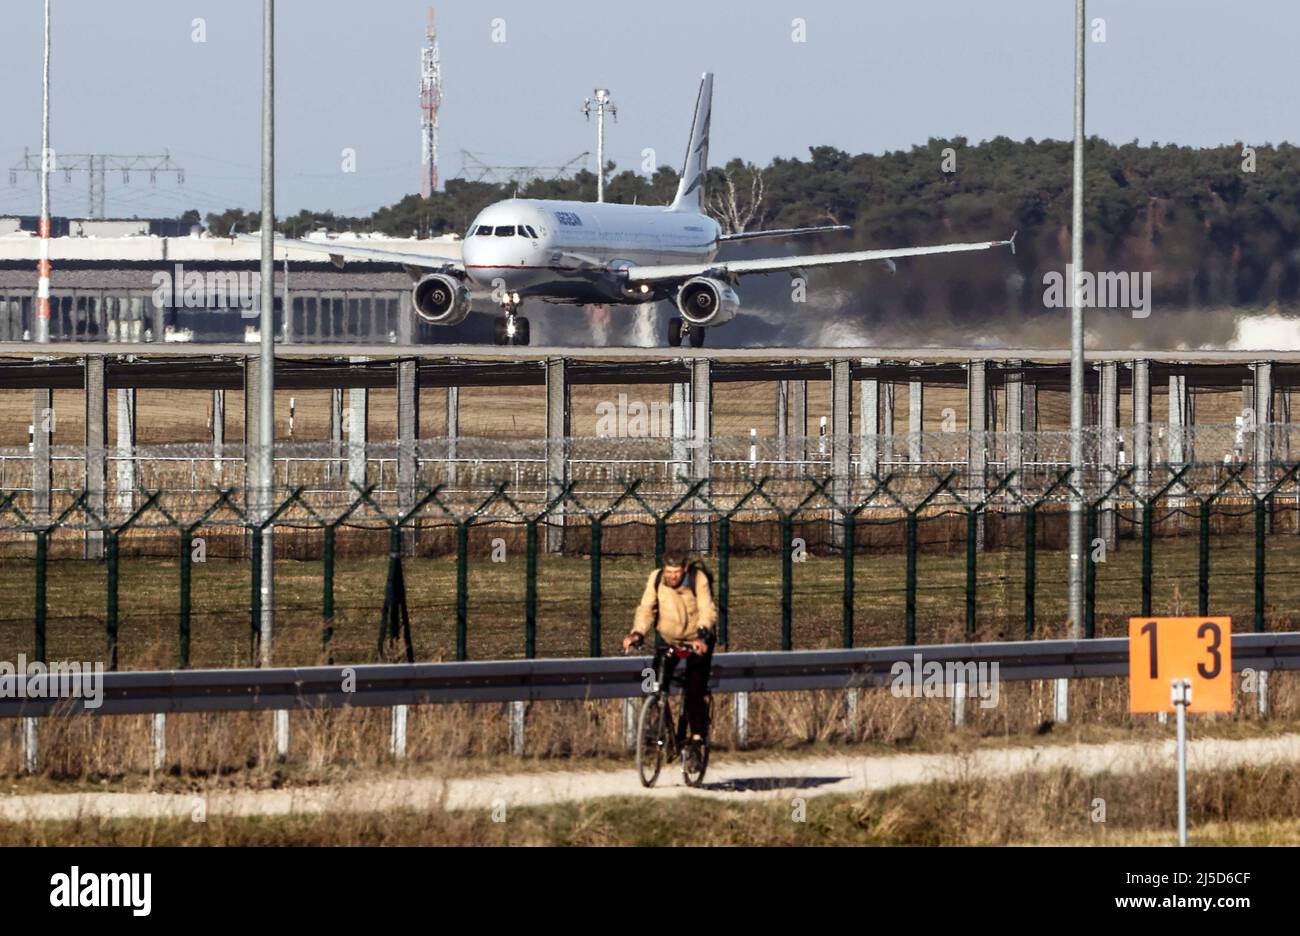 An Airbus of the Greek Aegan airline takes off at BER Airport, Berlin Brandenburg. [automated translation] Stock Photo